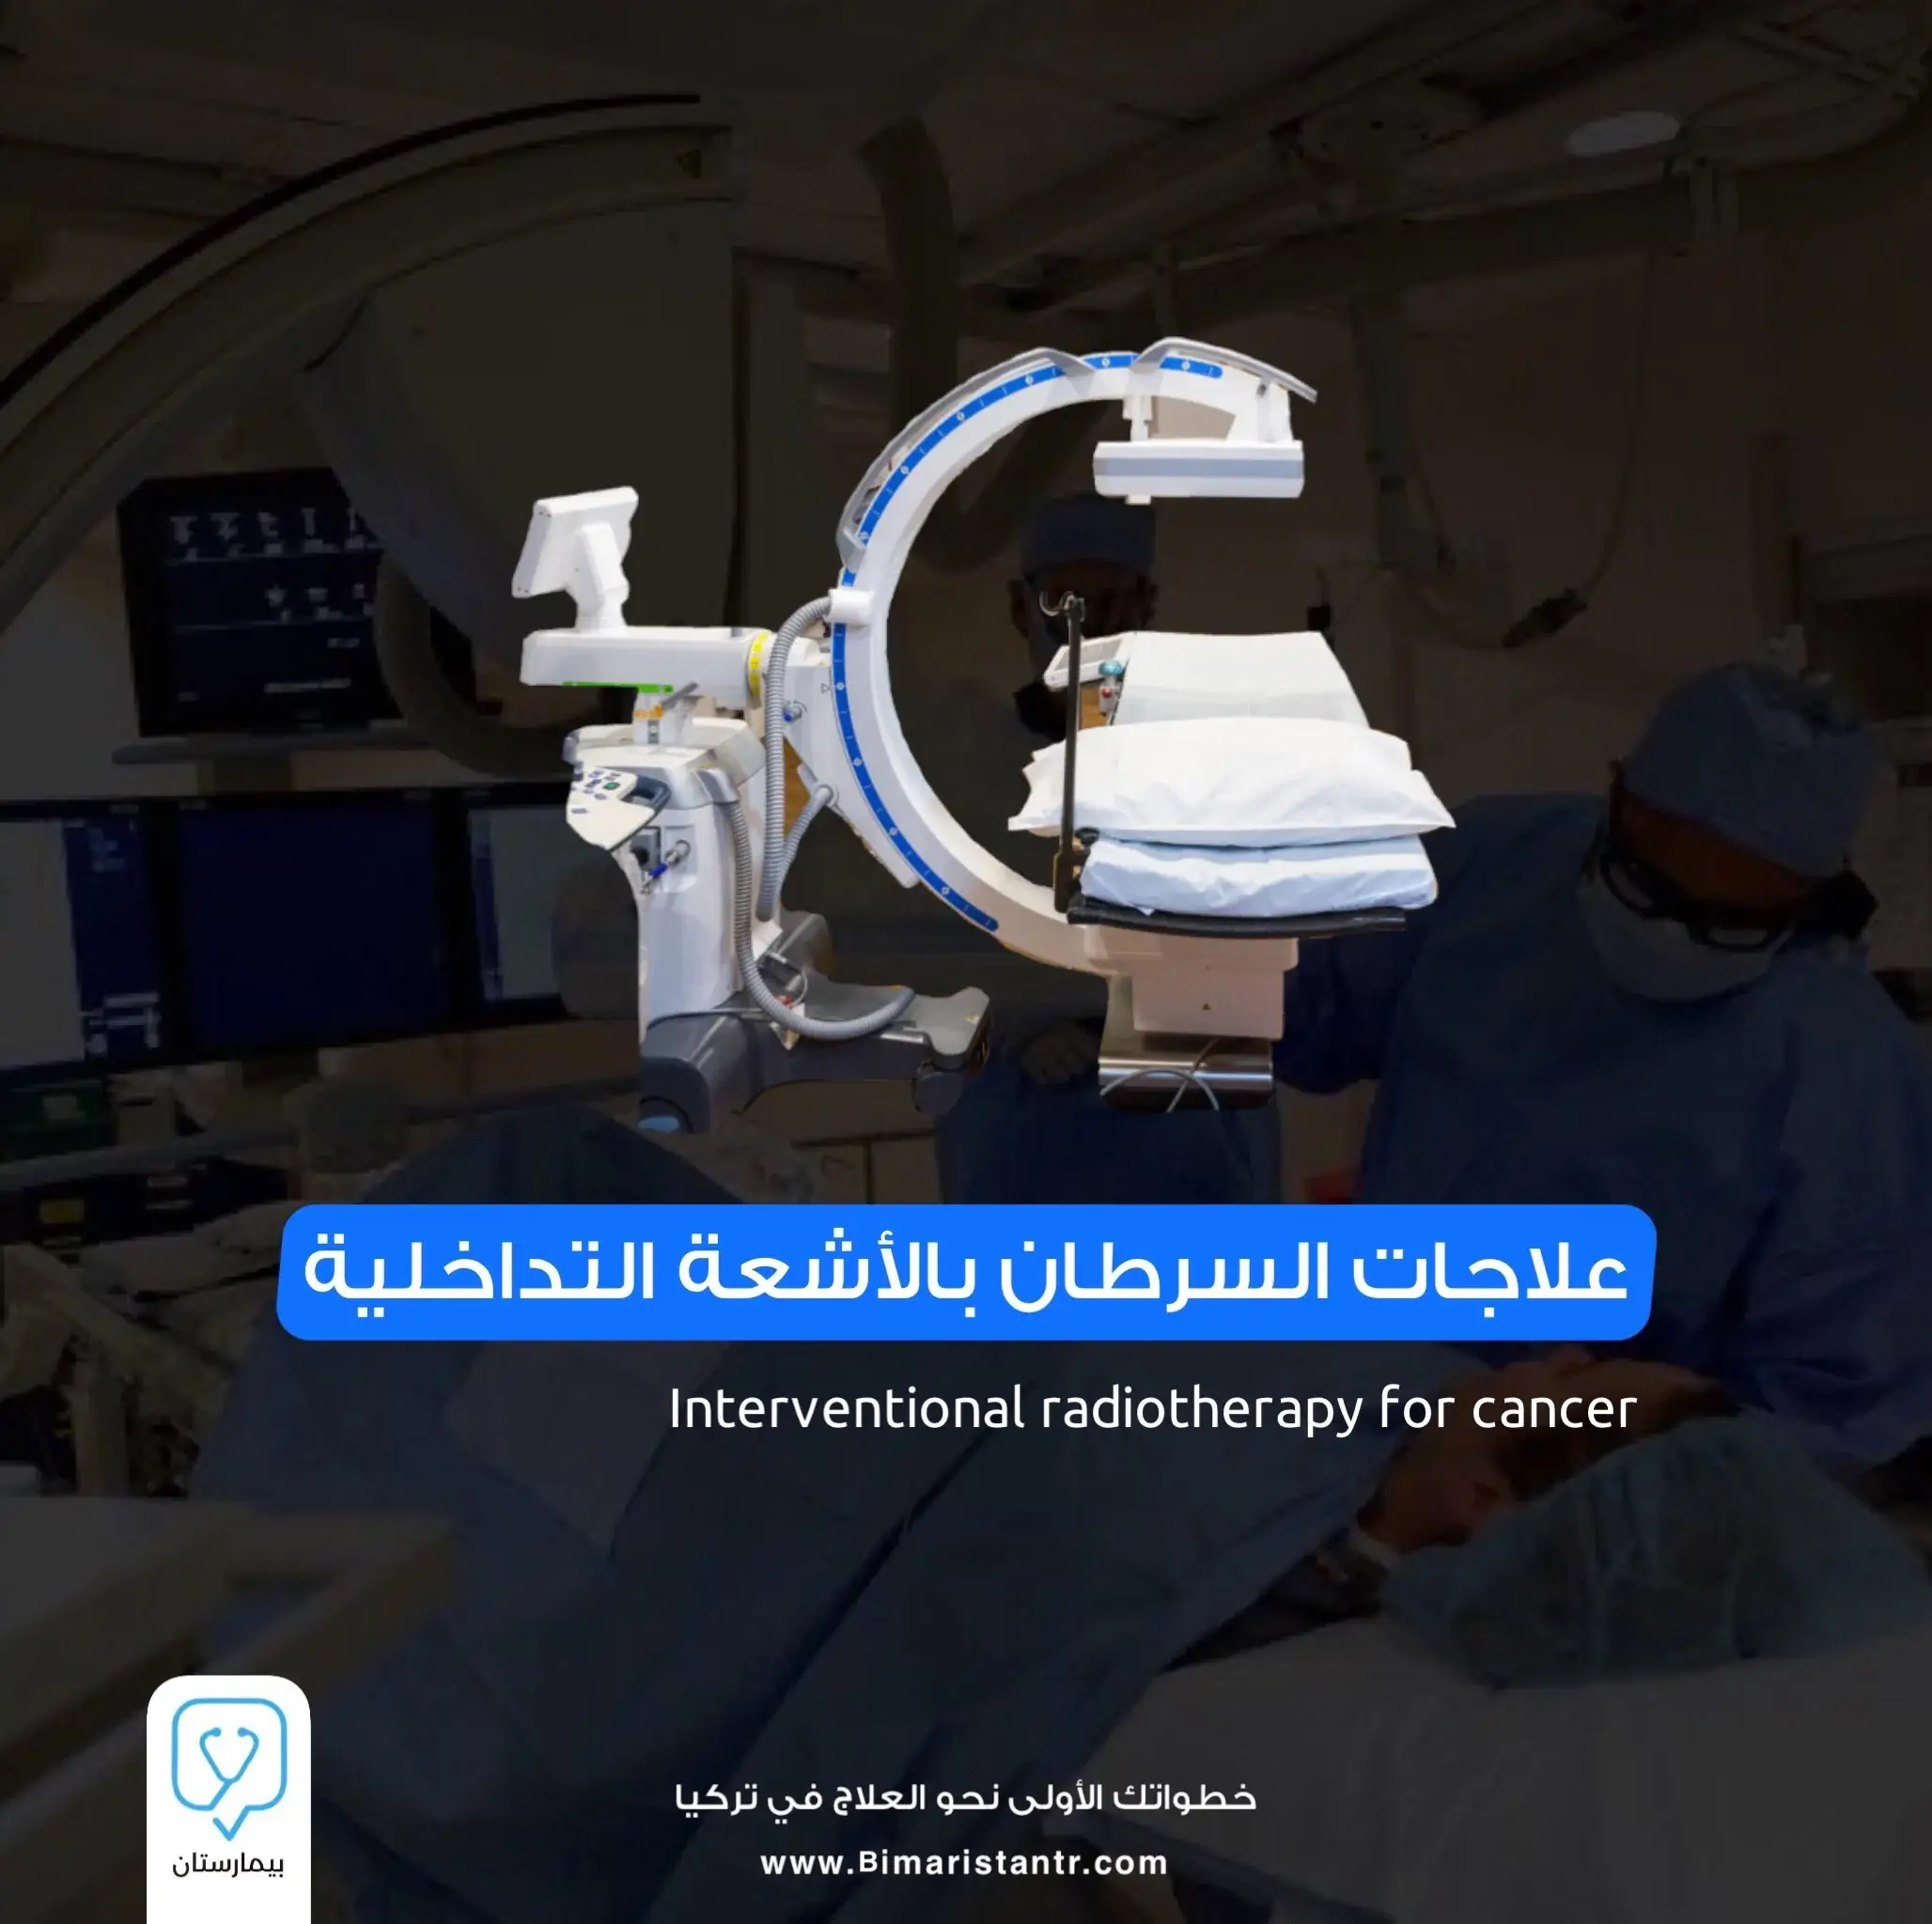 Interventional radiotherapy for cancer